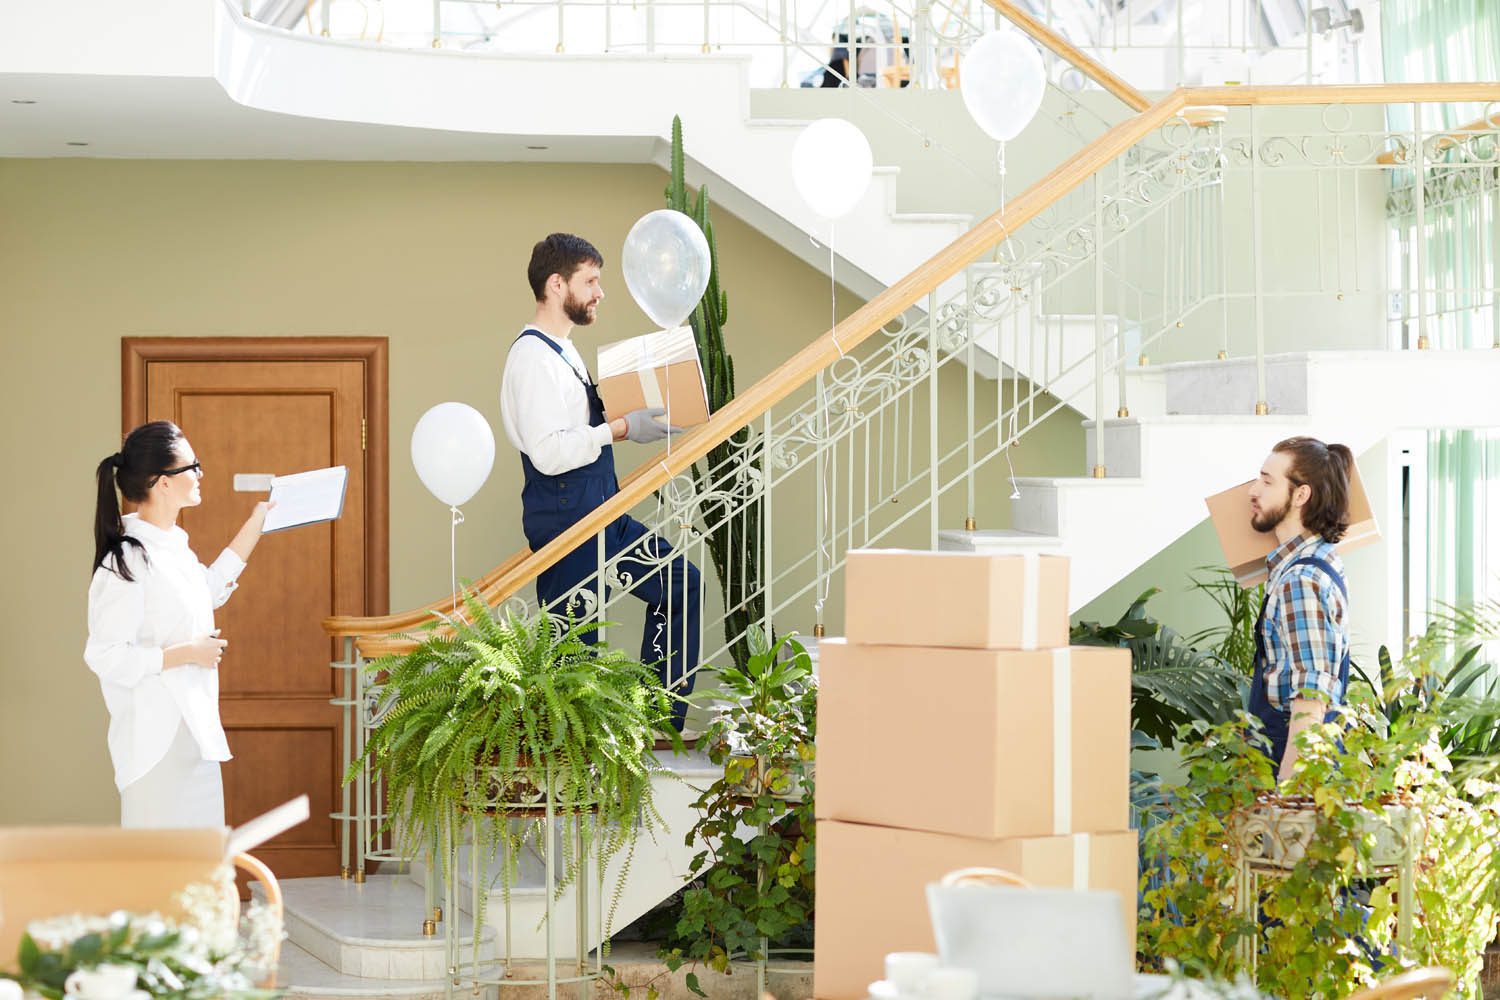 Villa Movers and Packers Services in Dubai